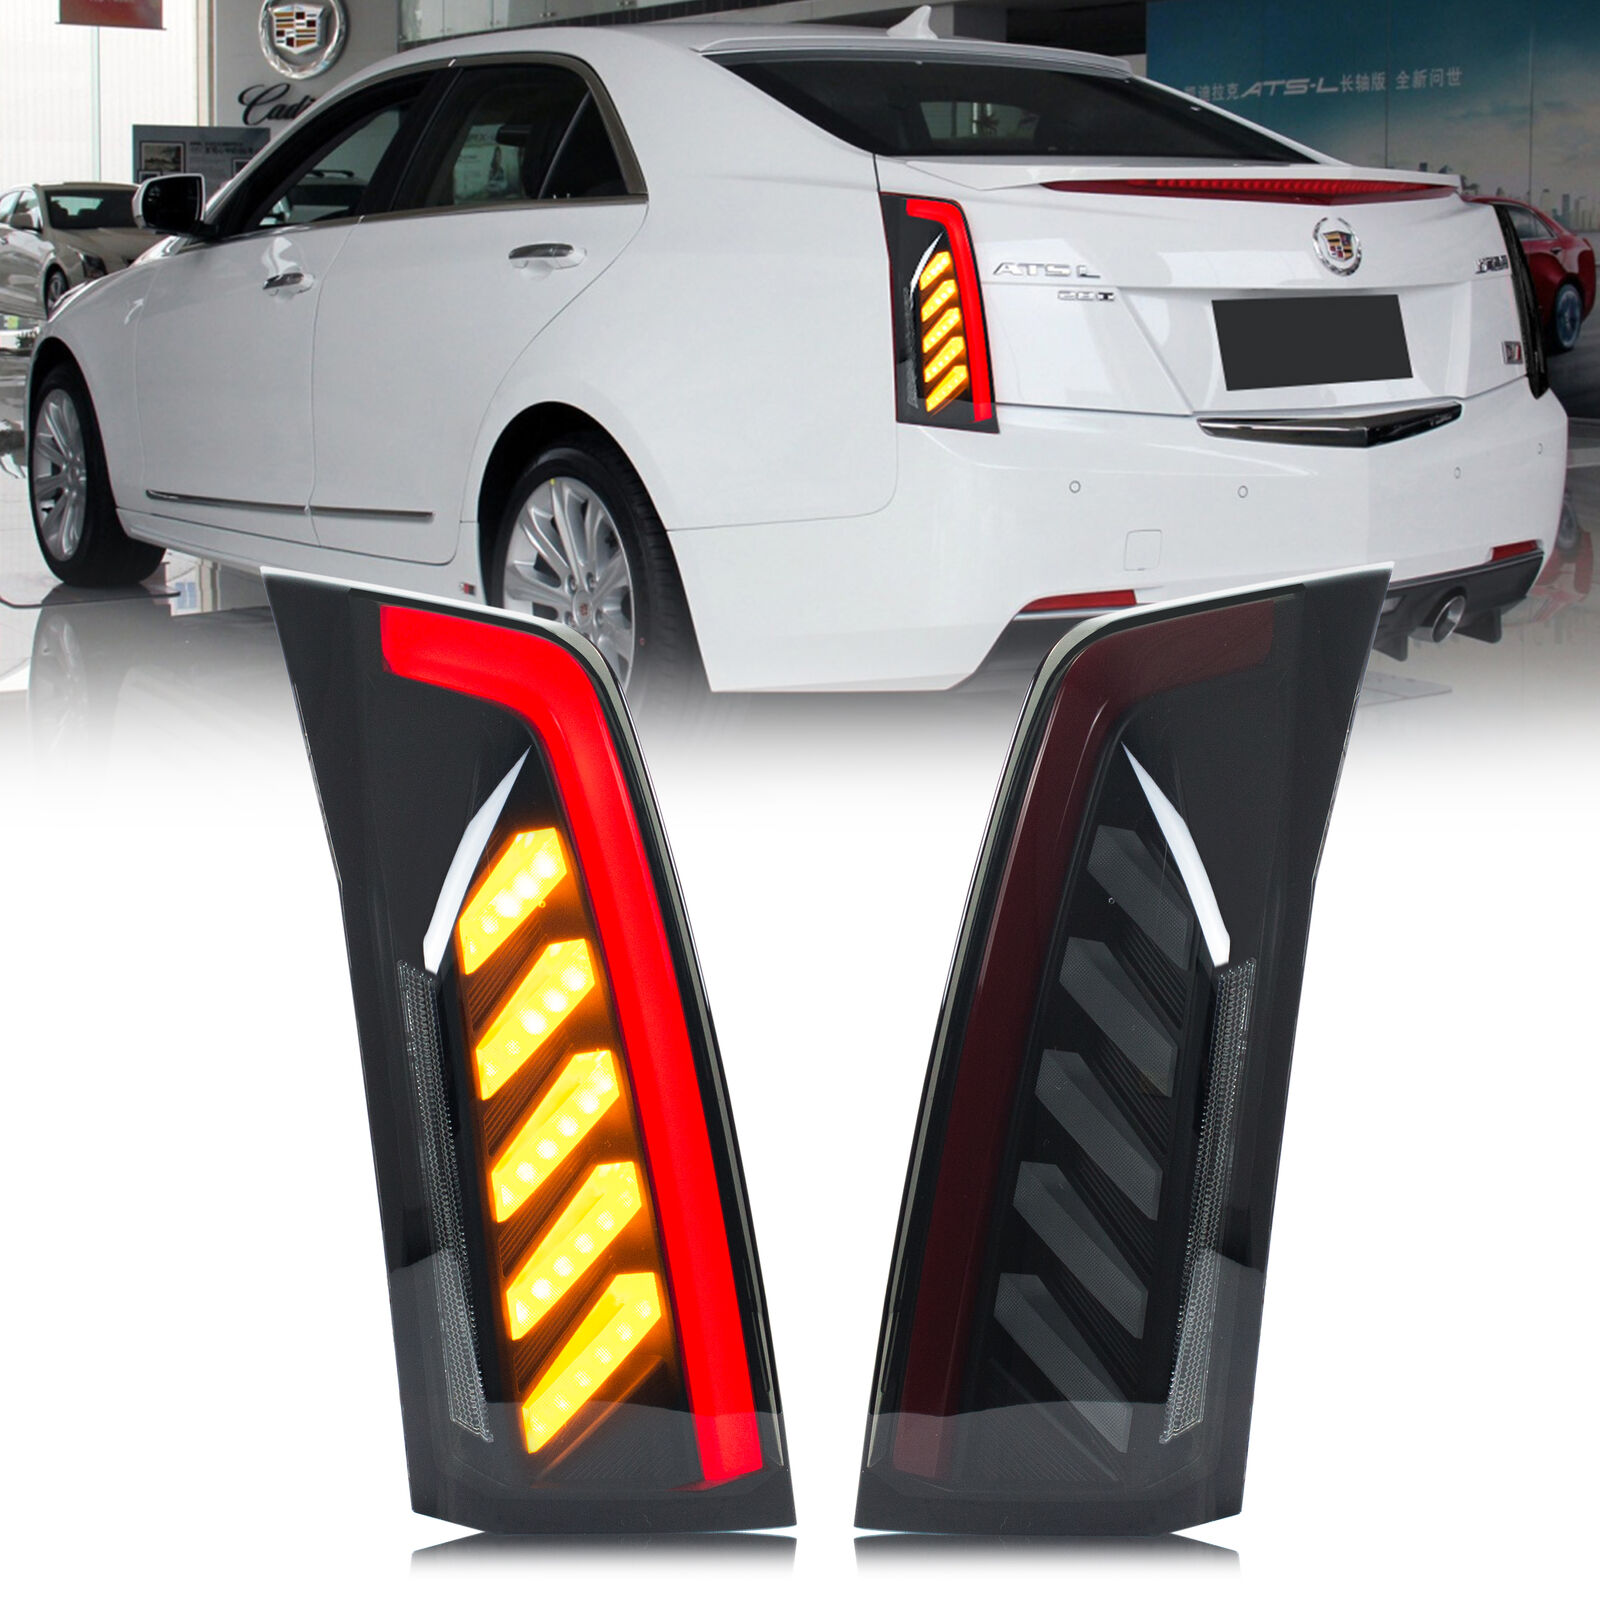 LED Black Tail Lights for Cadillac ATS 2013-2018 1st Gen Sequential Rear Lamps